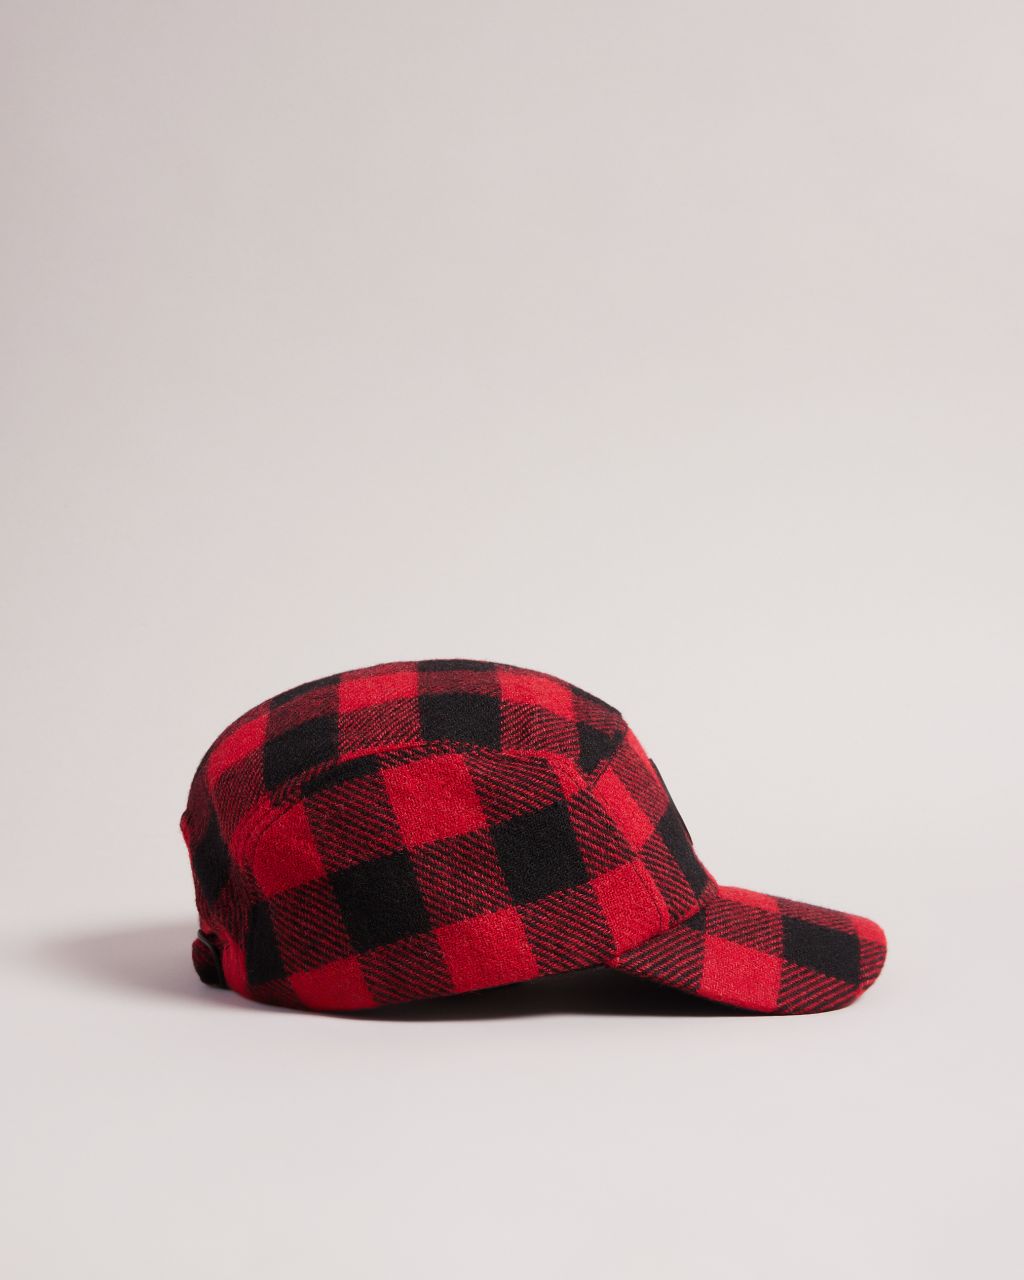 Ted Baker Men's Check Cap in Red, Pettio, Wool